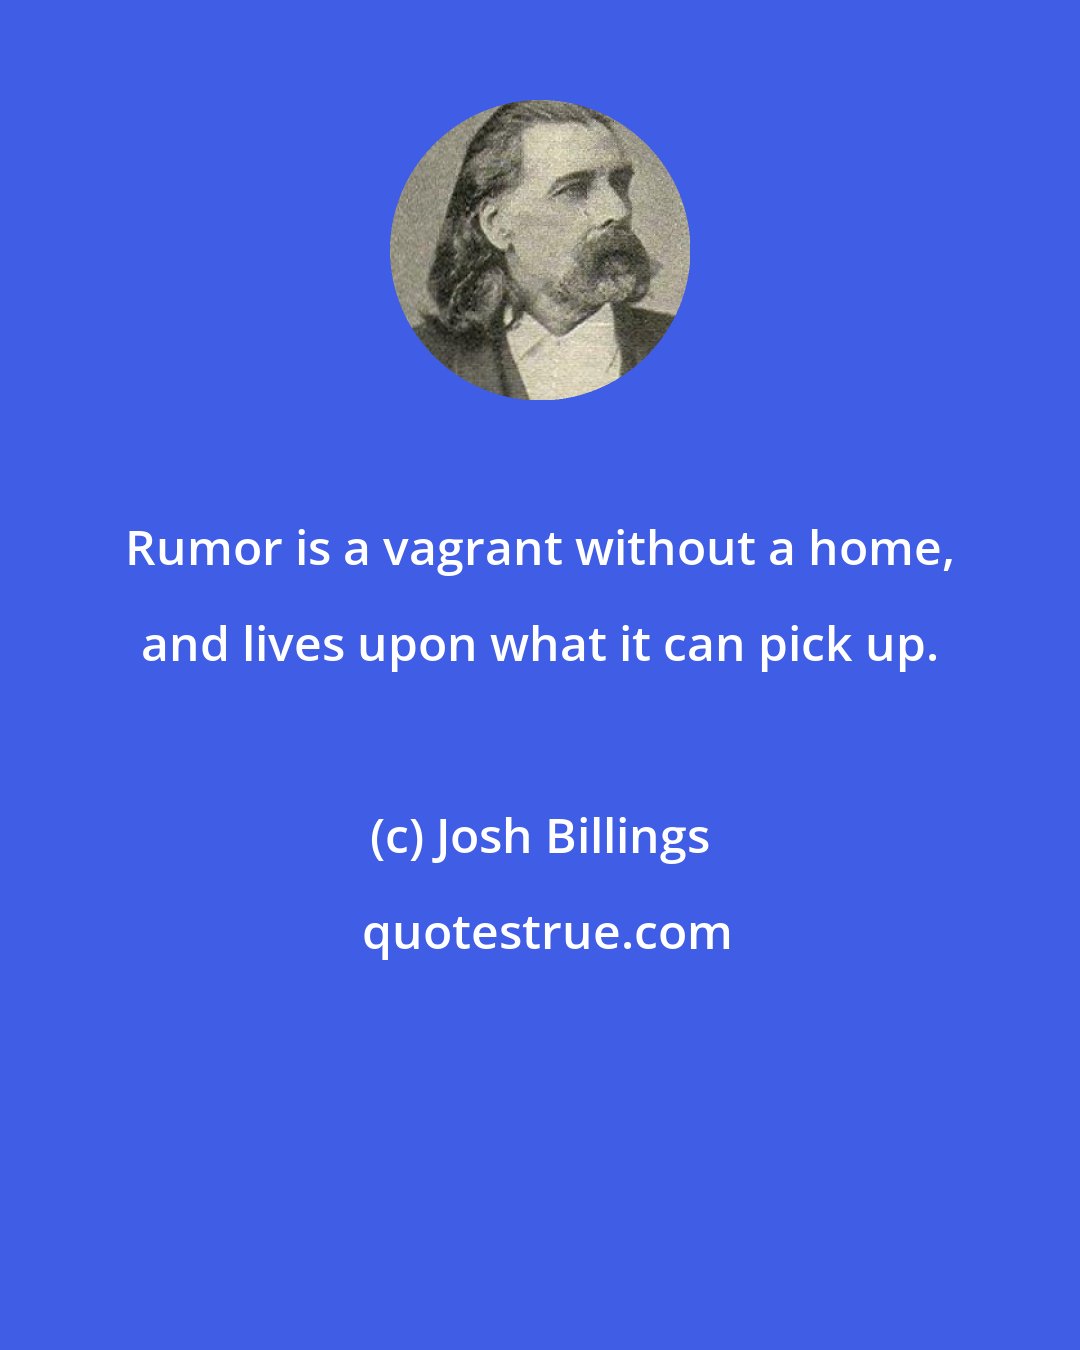 Josh Billings: Rumor is a vagrant without a home, and lives upon what it can pick up.